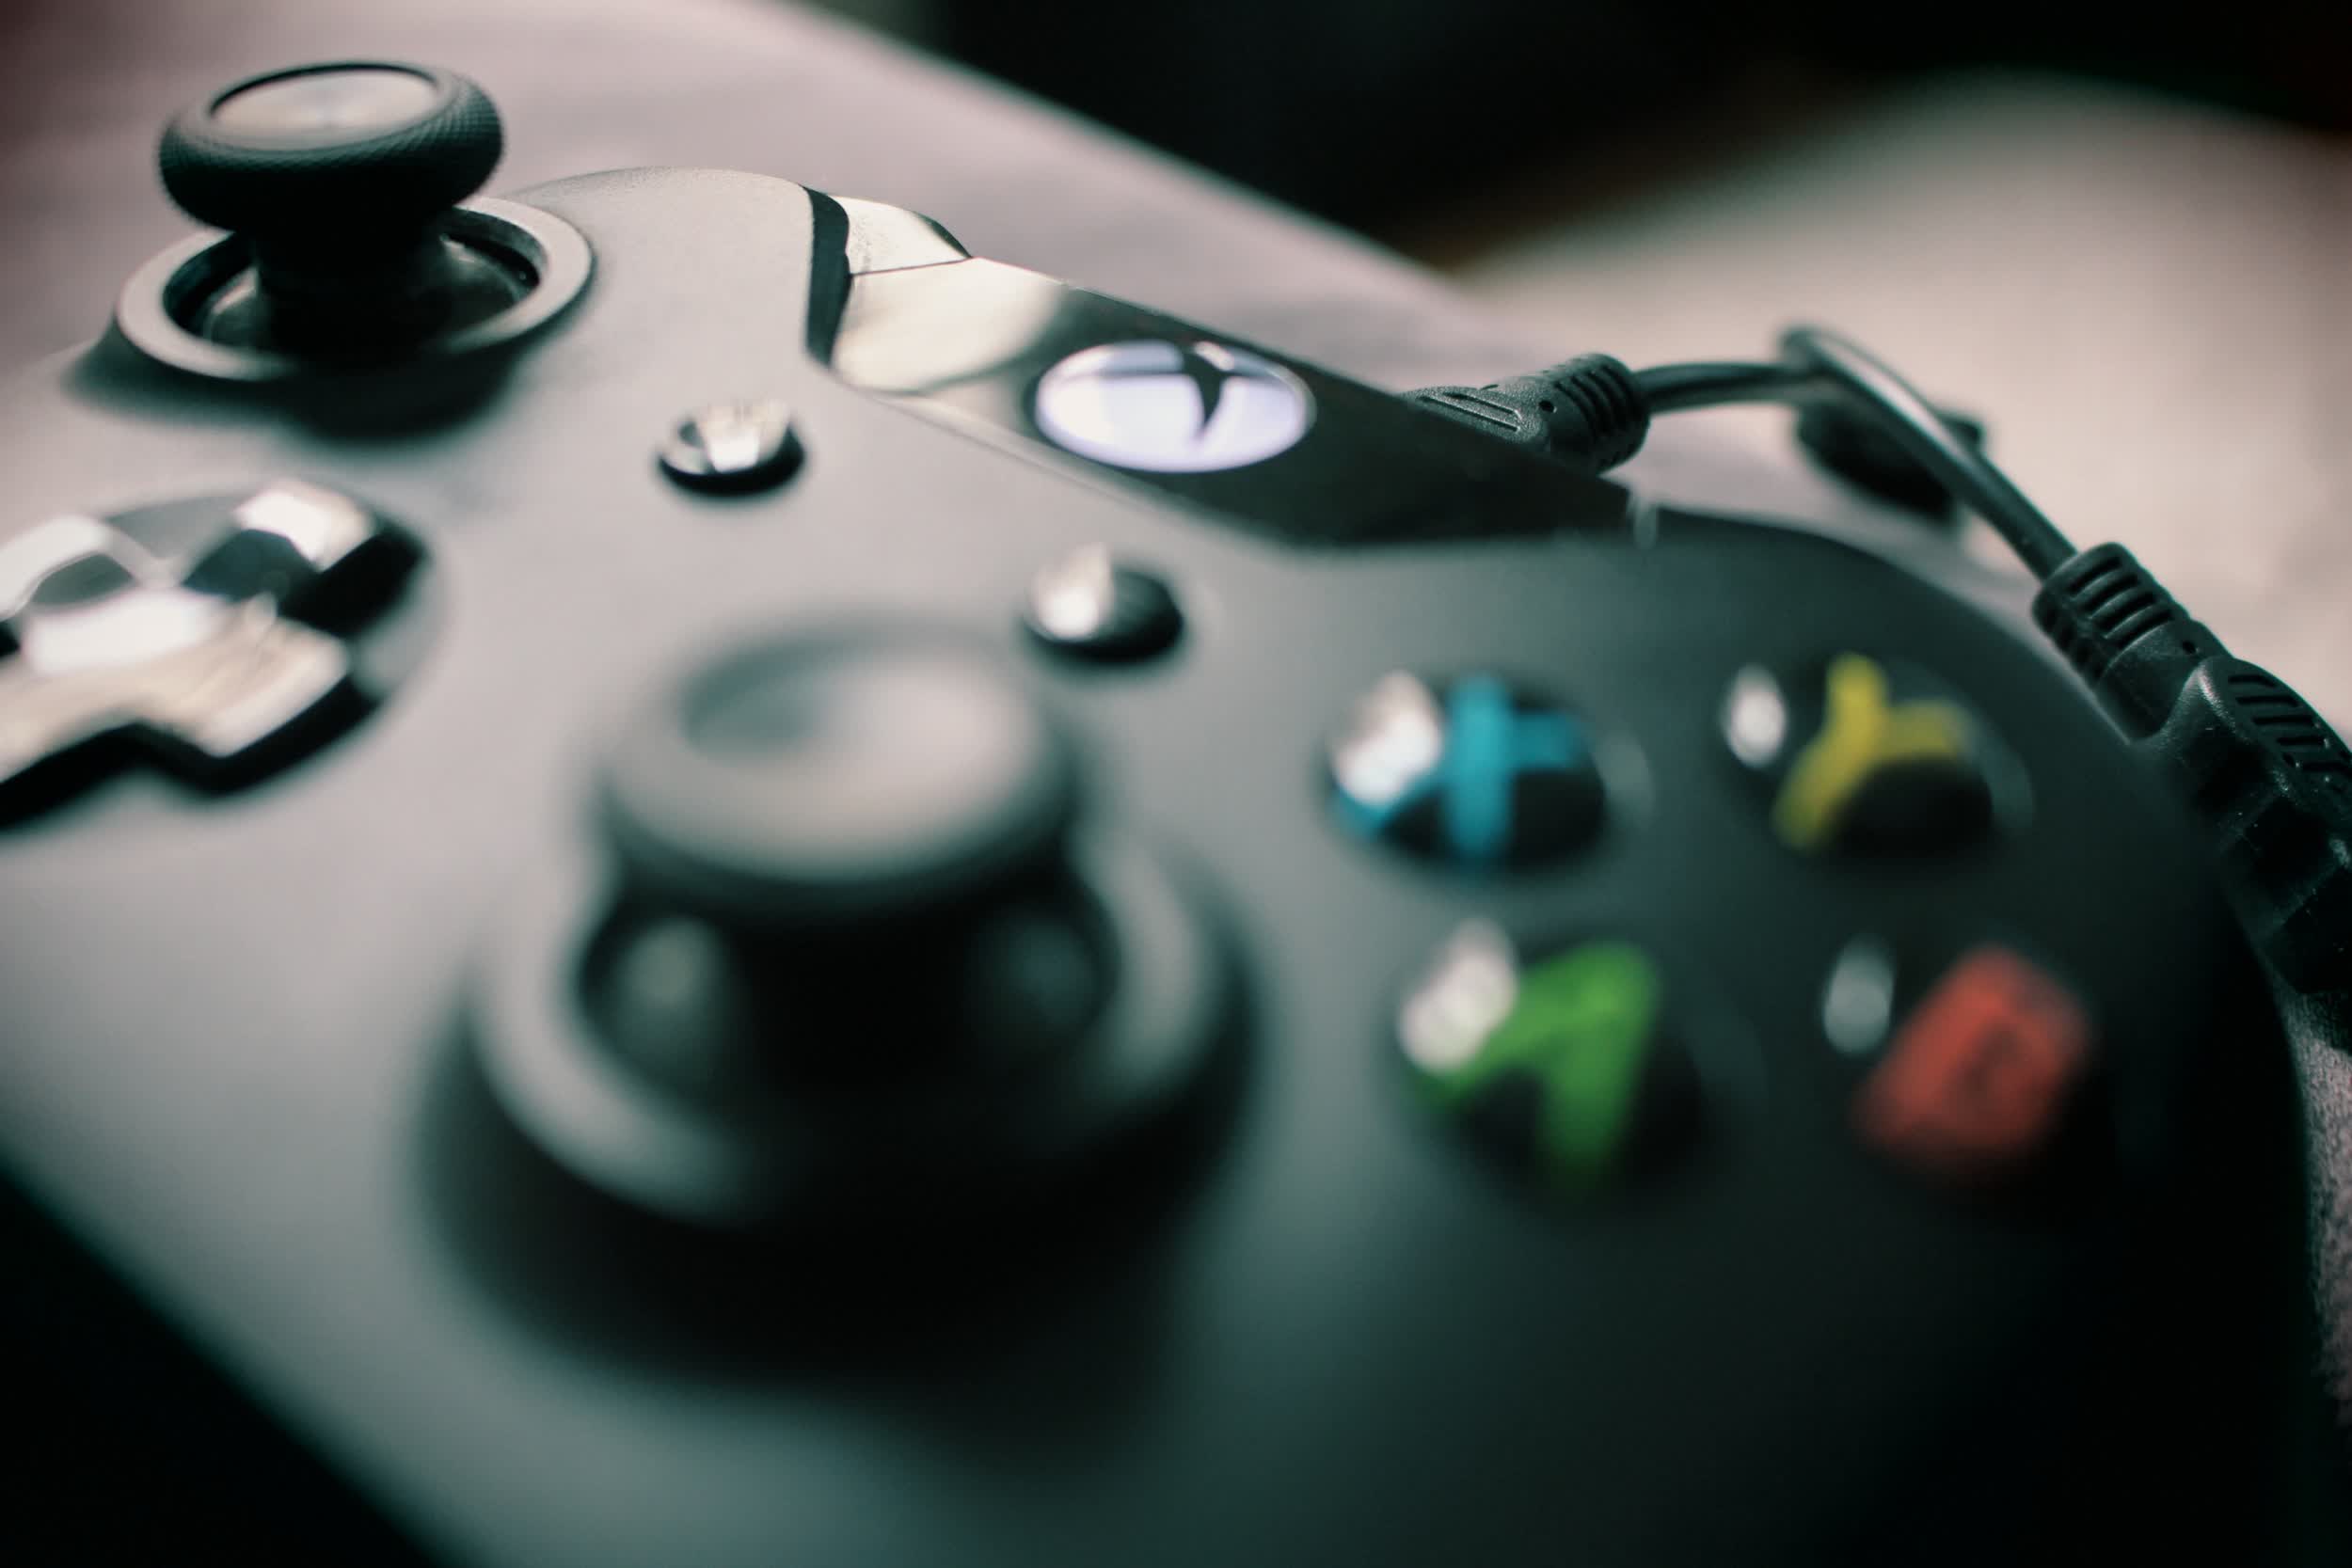 Microsoft has sold more than 21 million Xbox Series consoles